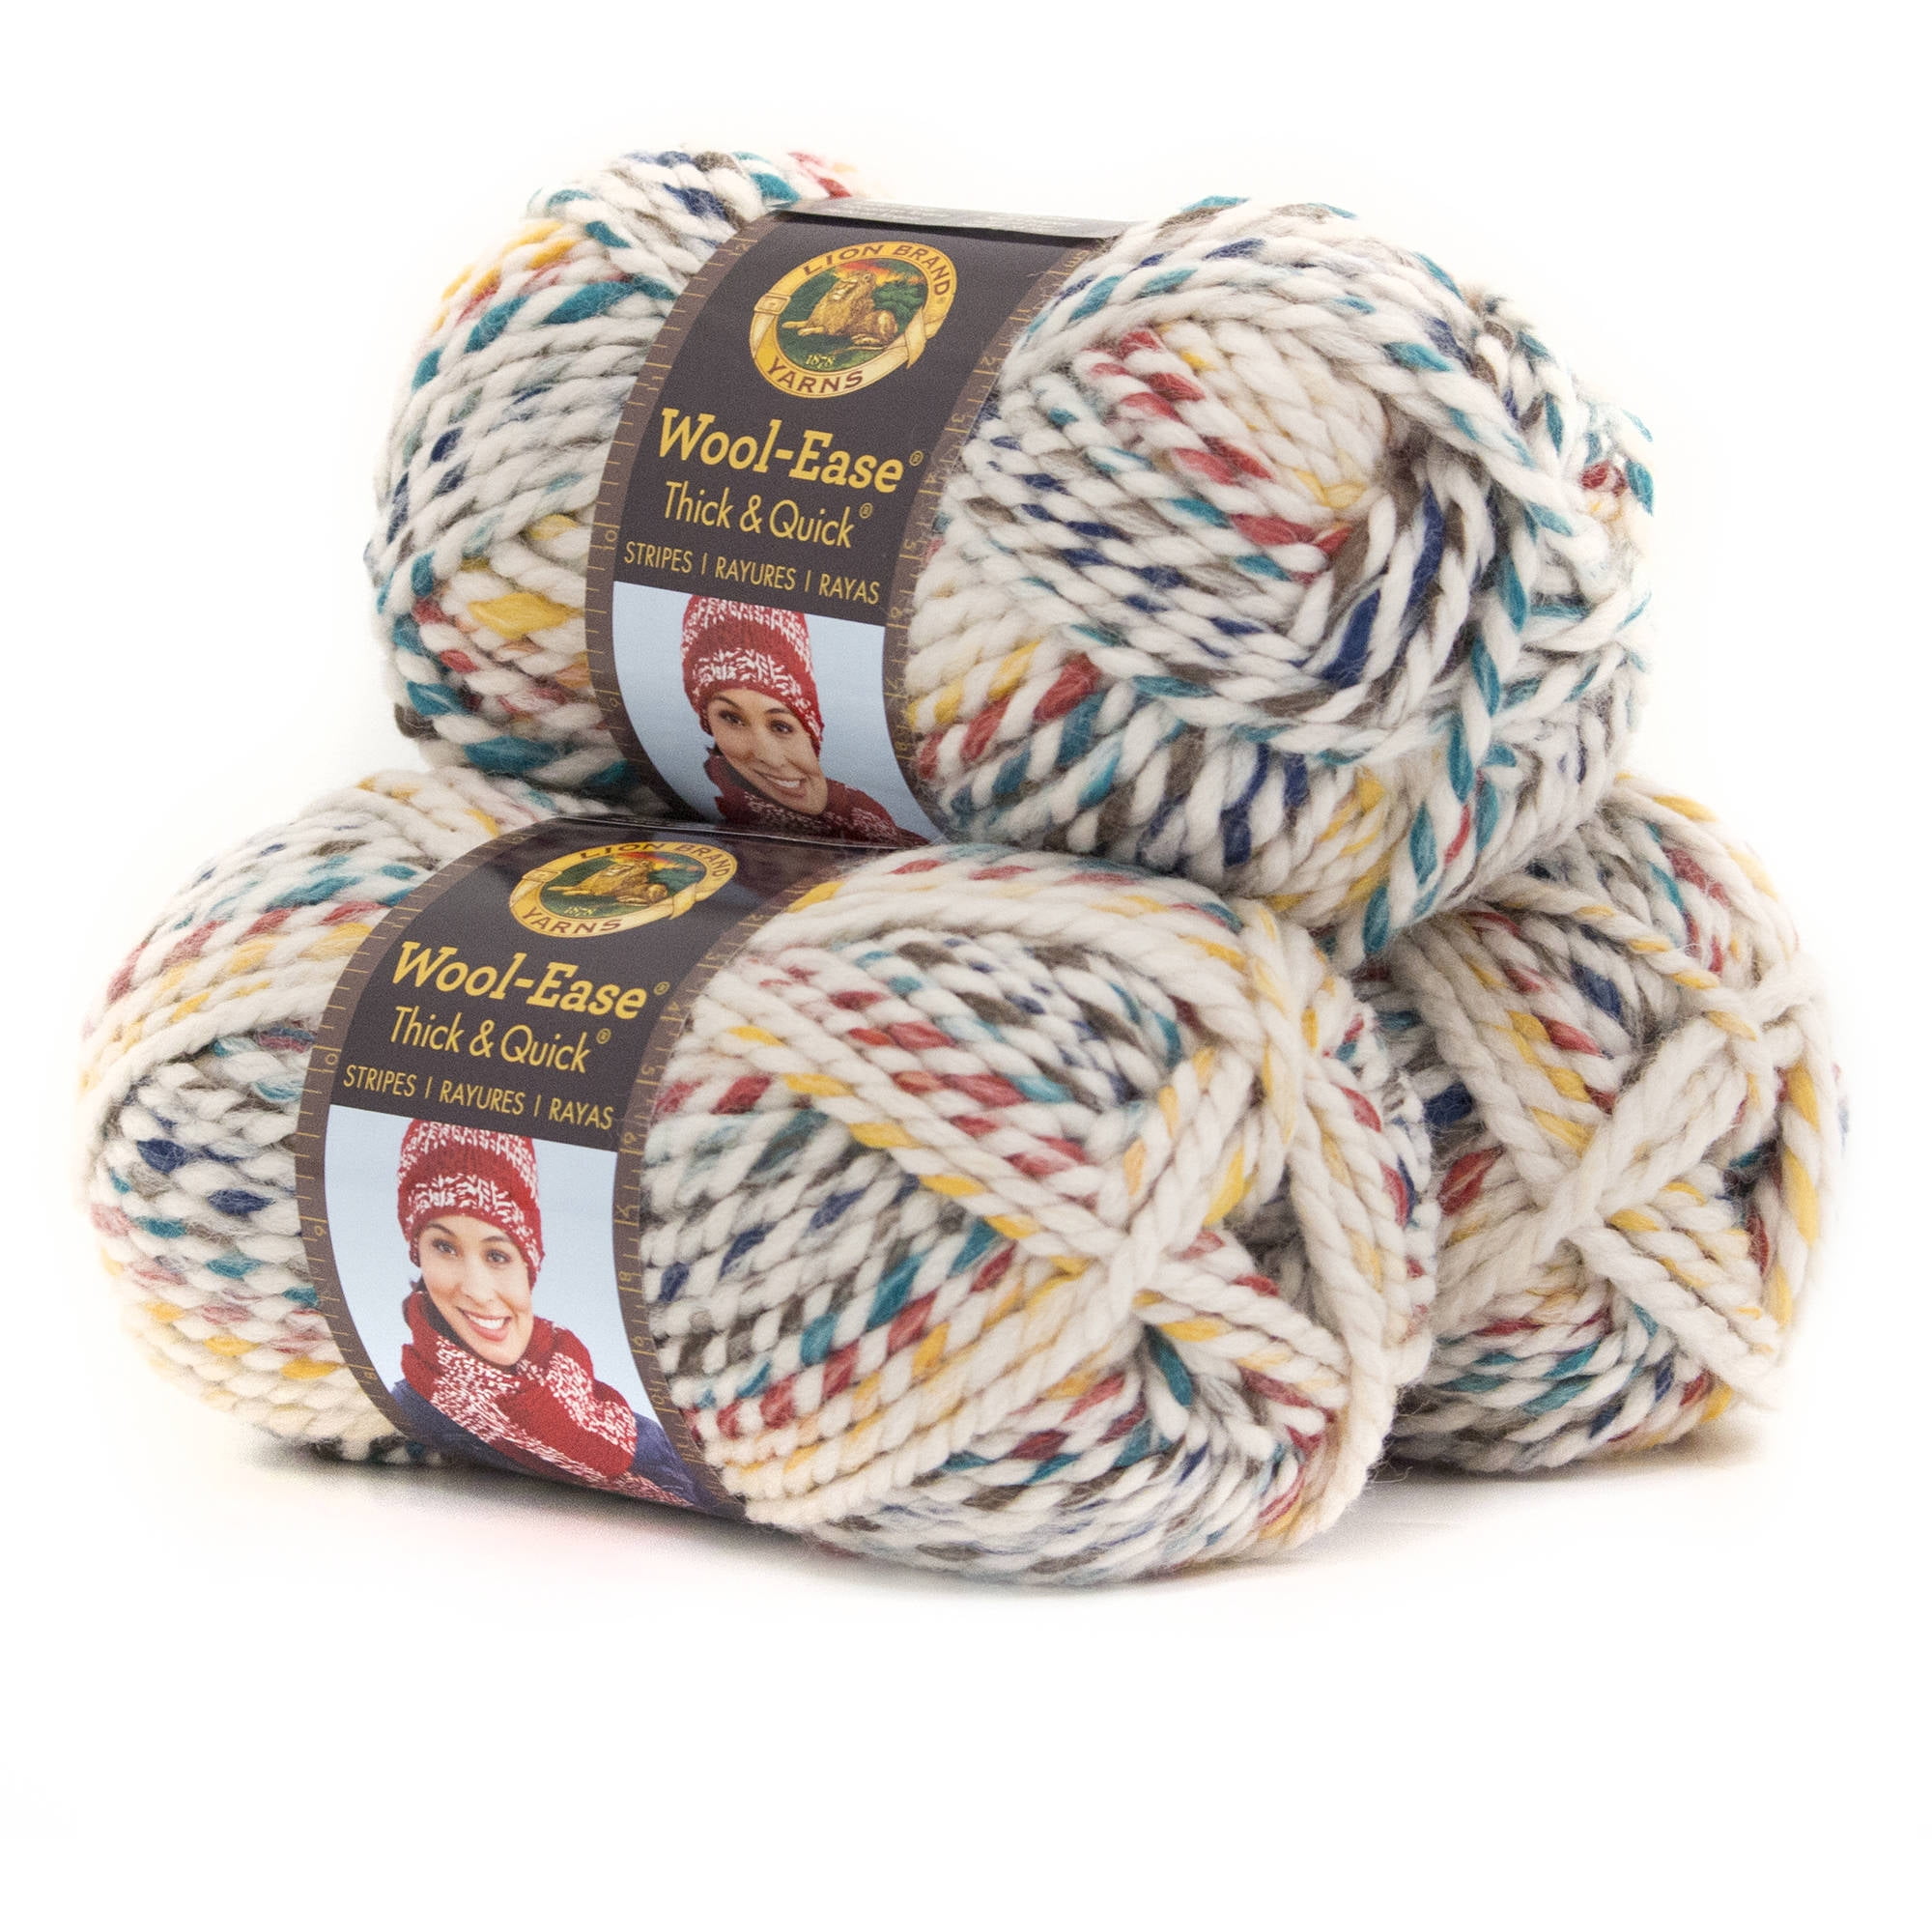 Lion Brand Yarn Wool-Ease Thick and Quick Bedrock Classic Super Bulky  Acrylic, Wool Multi-color Multi-color Yarn 